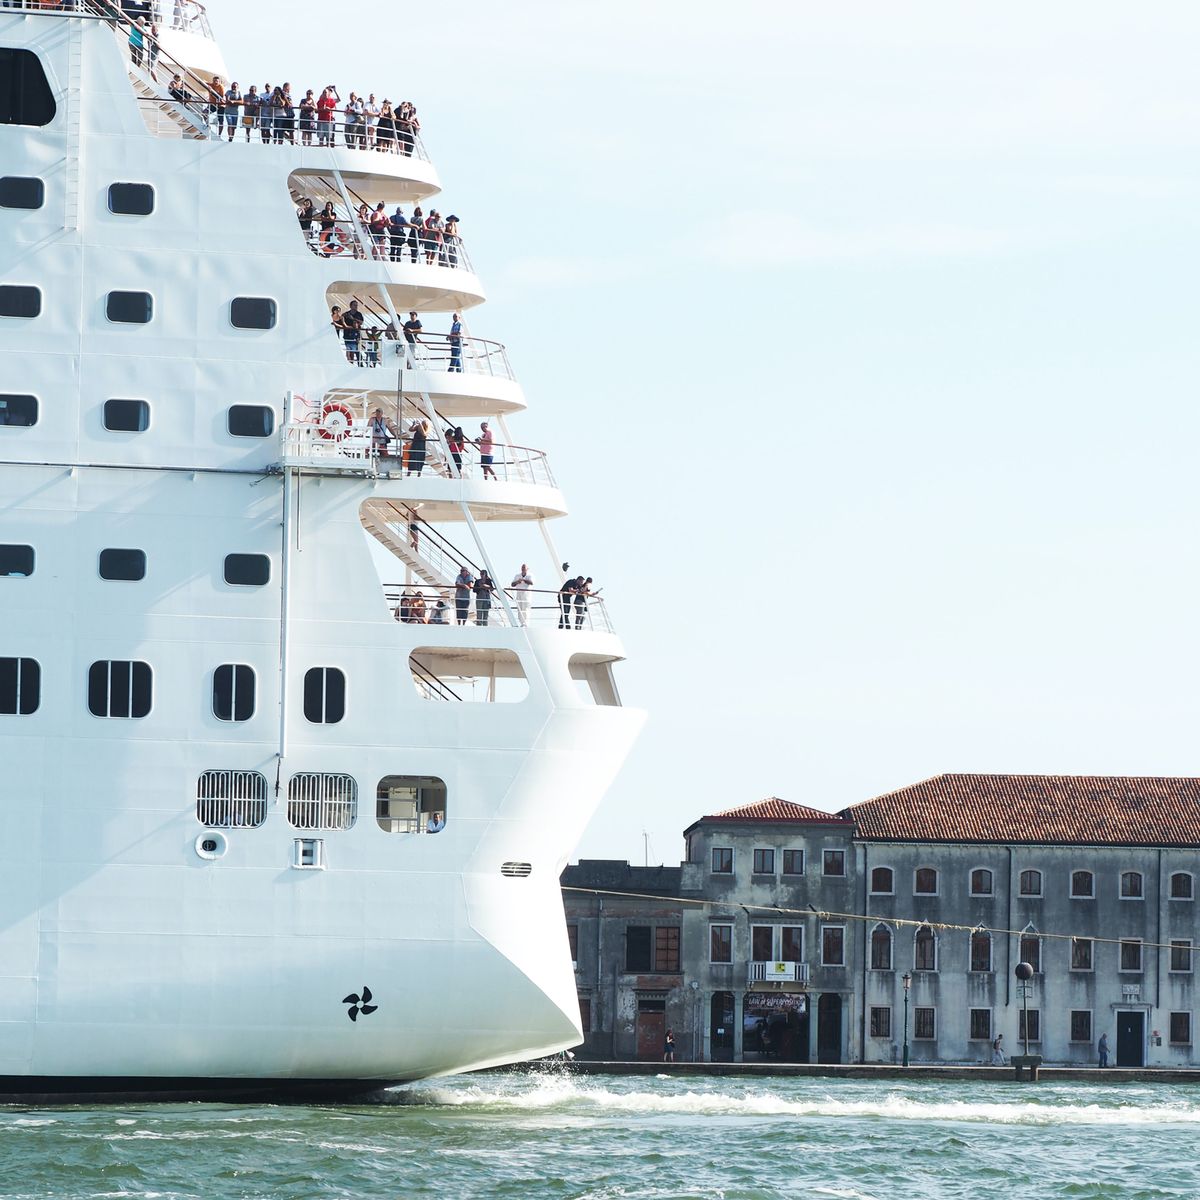 The first cruise ship since the start of the pandemic is due to sail through Venice on 5 June © Drew Harbour